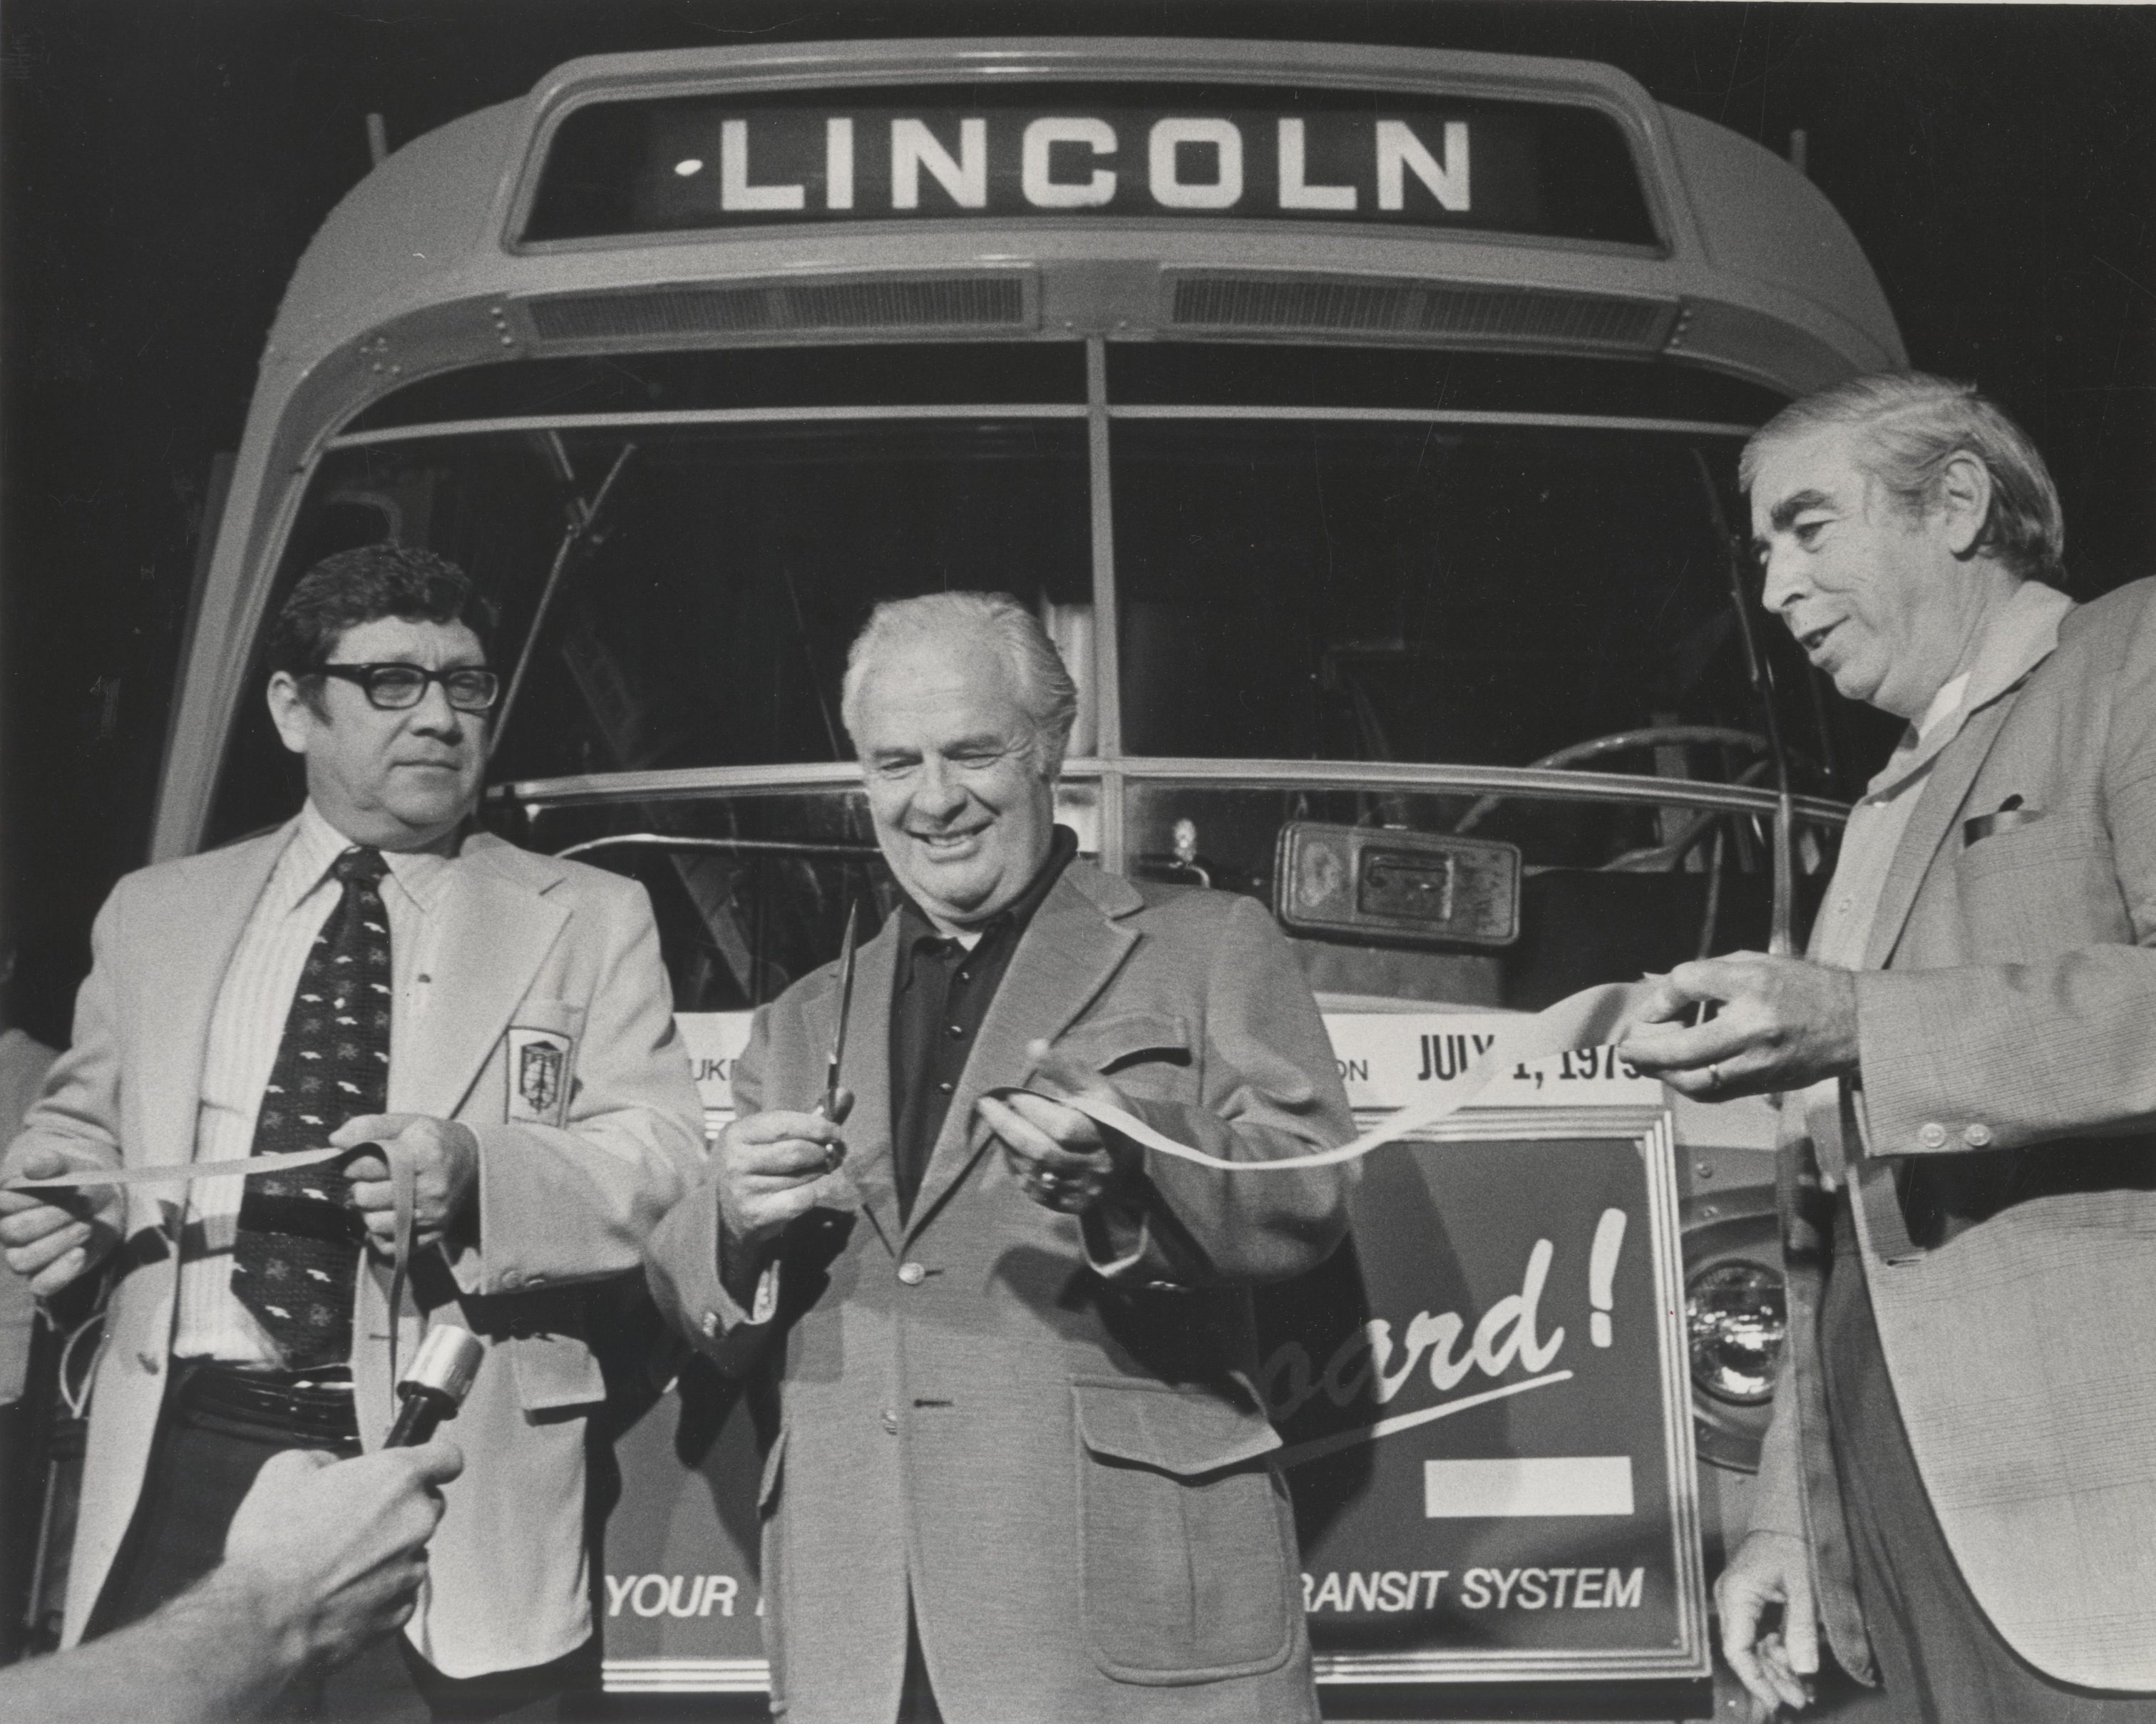 John Doyne (middle) and William O'Donnell (right) attend a ribbon cutting ceremony in 1975. Doyne and O'Donnell served as successive county executives from 1960 to 1988 and were known as Irish politicians.